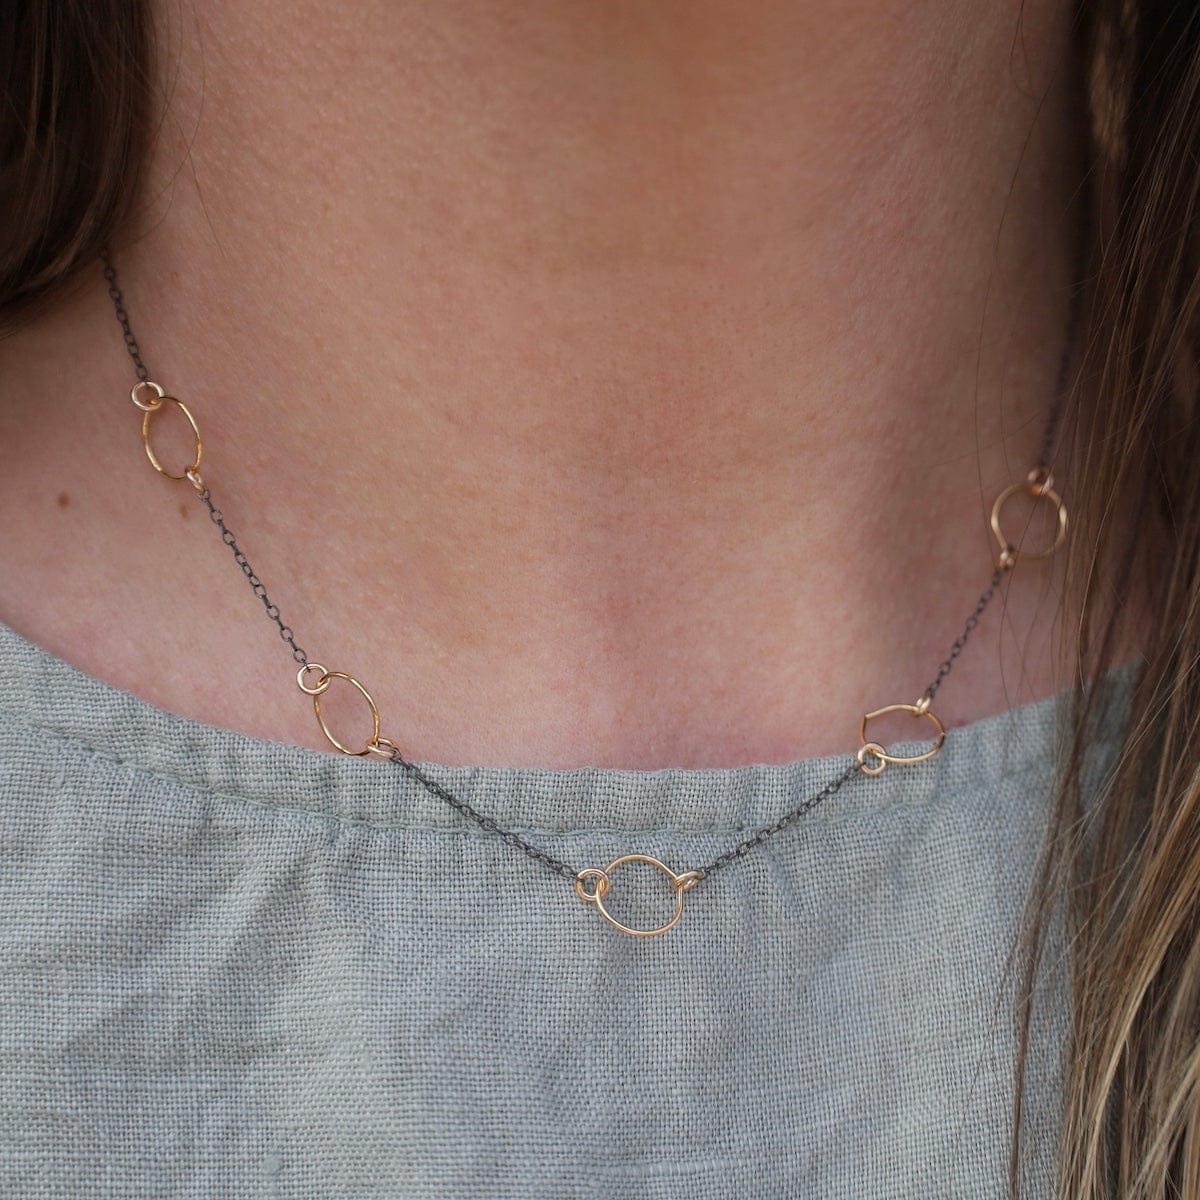 NKL Oxidized Chain with Small Gold Filled Hoops Necklace